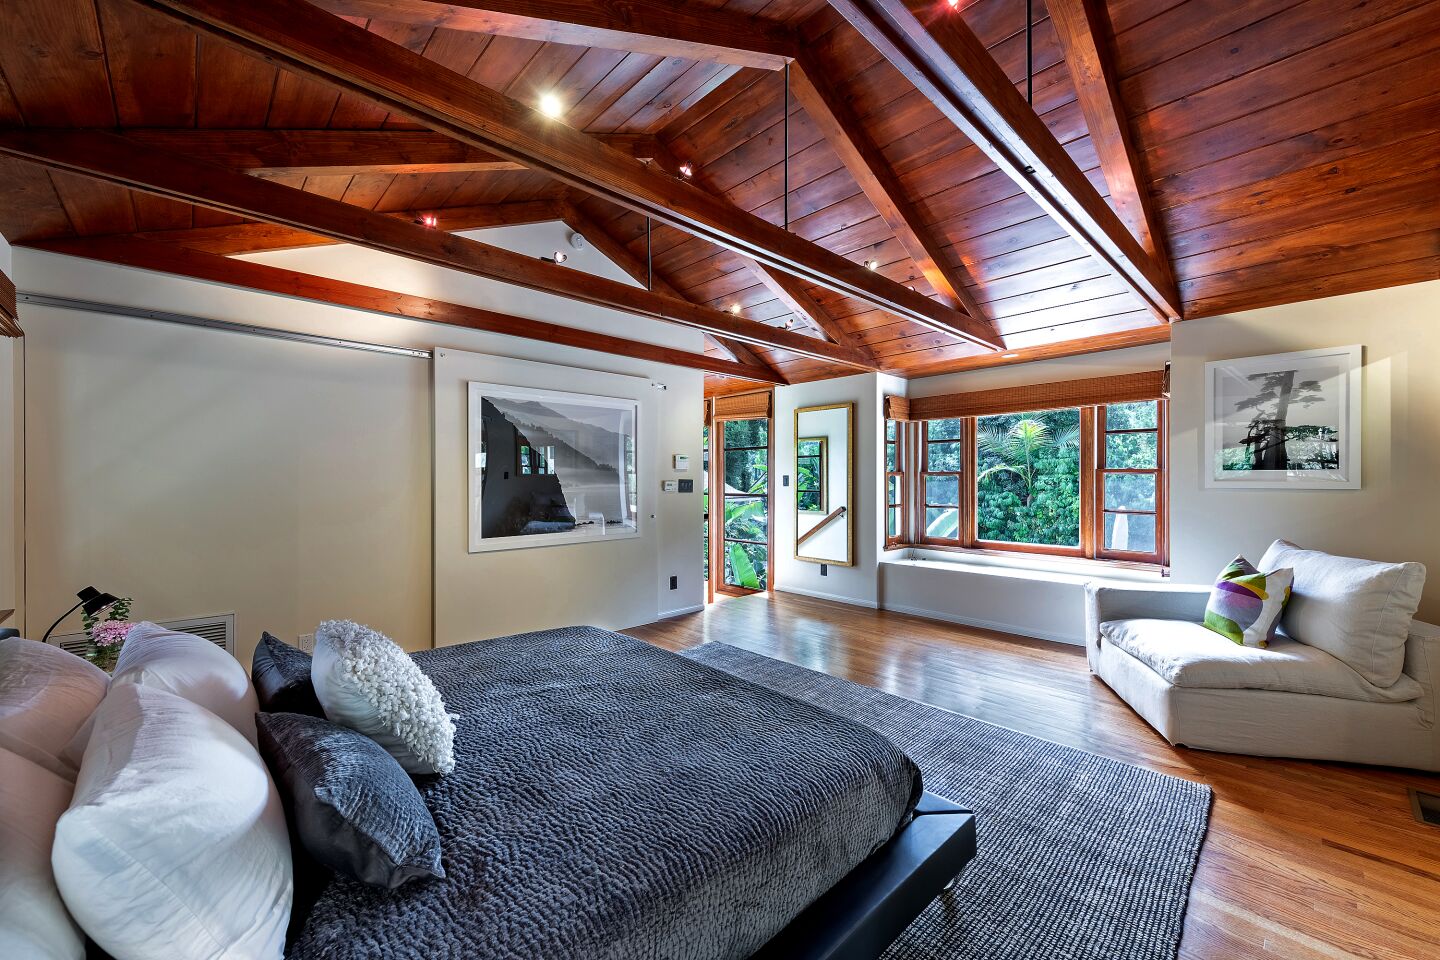 Vaulted ceilings and wood trimming are features of the 2,439-square-foot home.